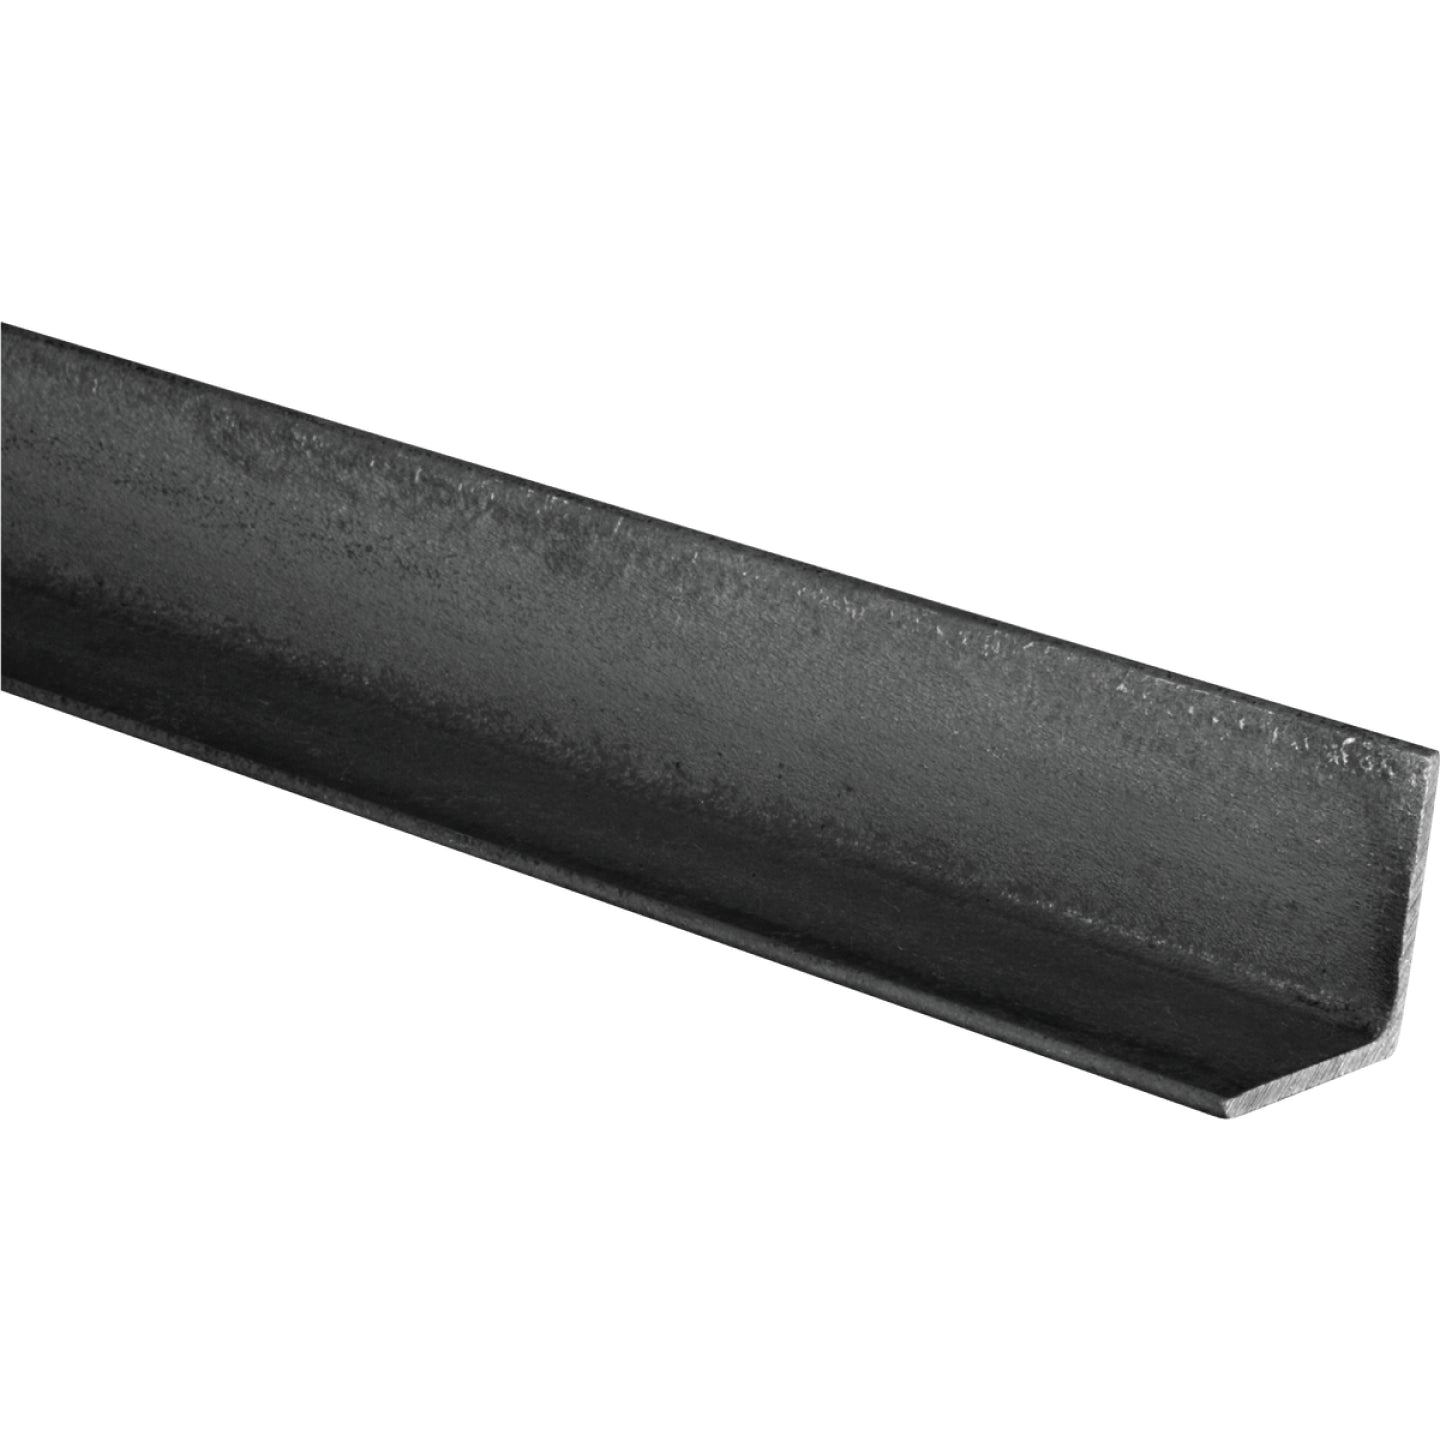 Hillman, HILLMAN Steelworks 1-1/2 In. x 3 Ft., 1/8 In. Construct-it Weldable Solid Angle